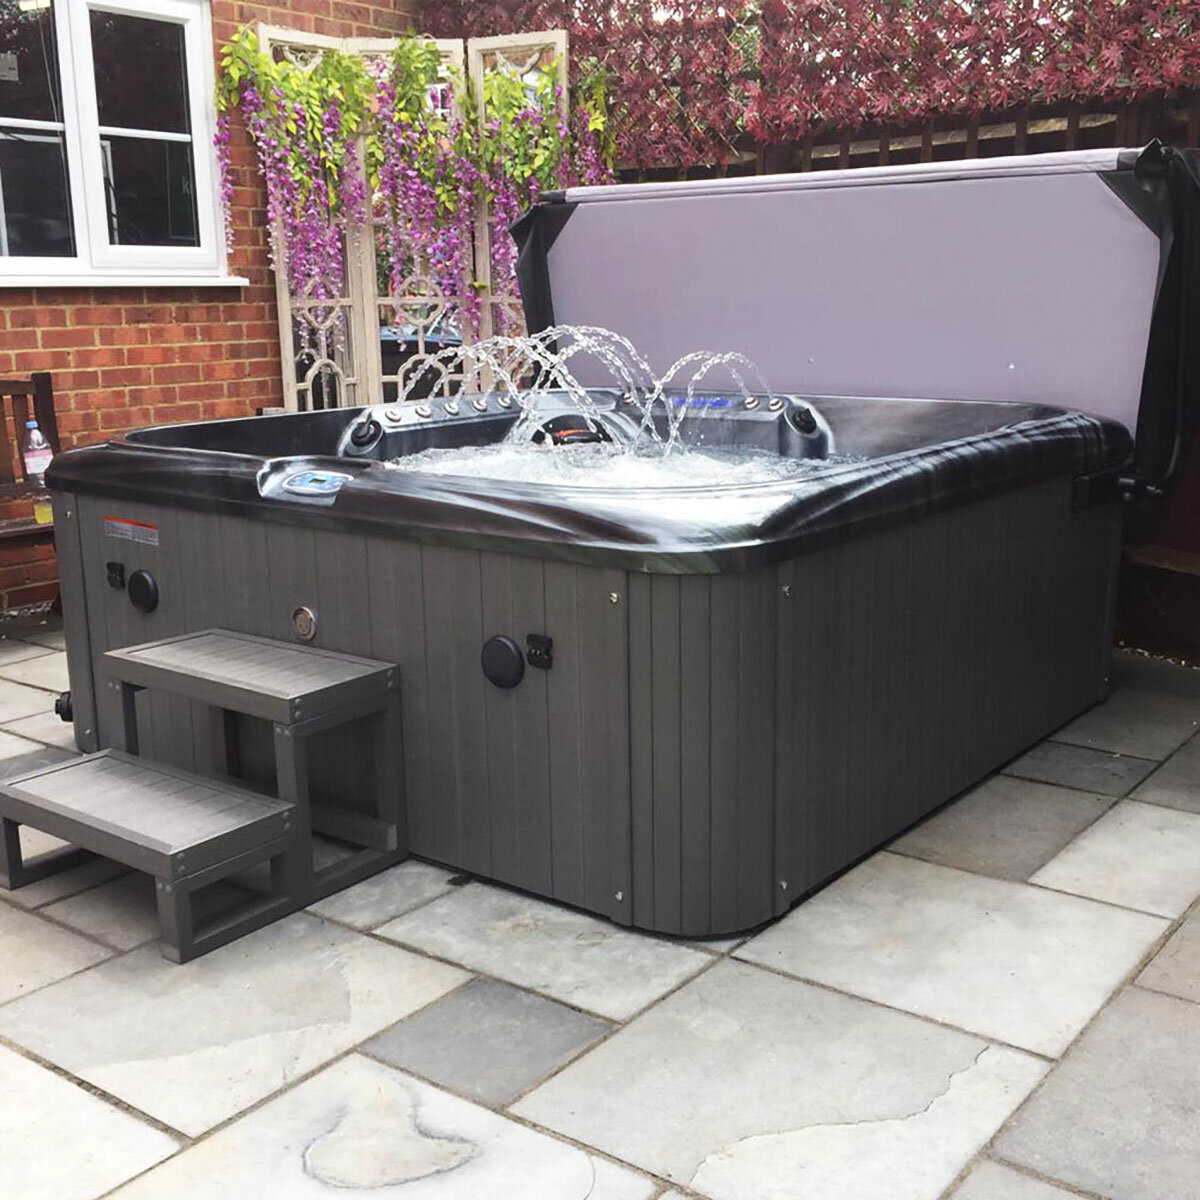 Blue Whale Spa San Julien 89-Jet 5 Person Hot Tub in Black - Delivered and Installed